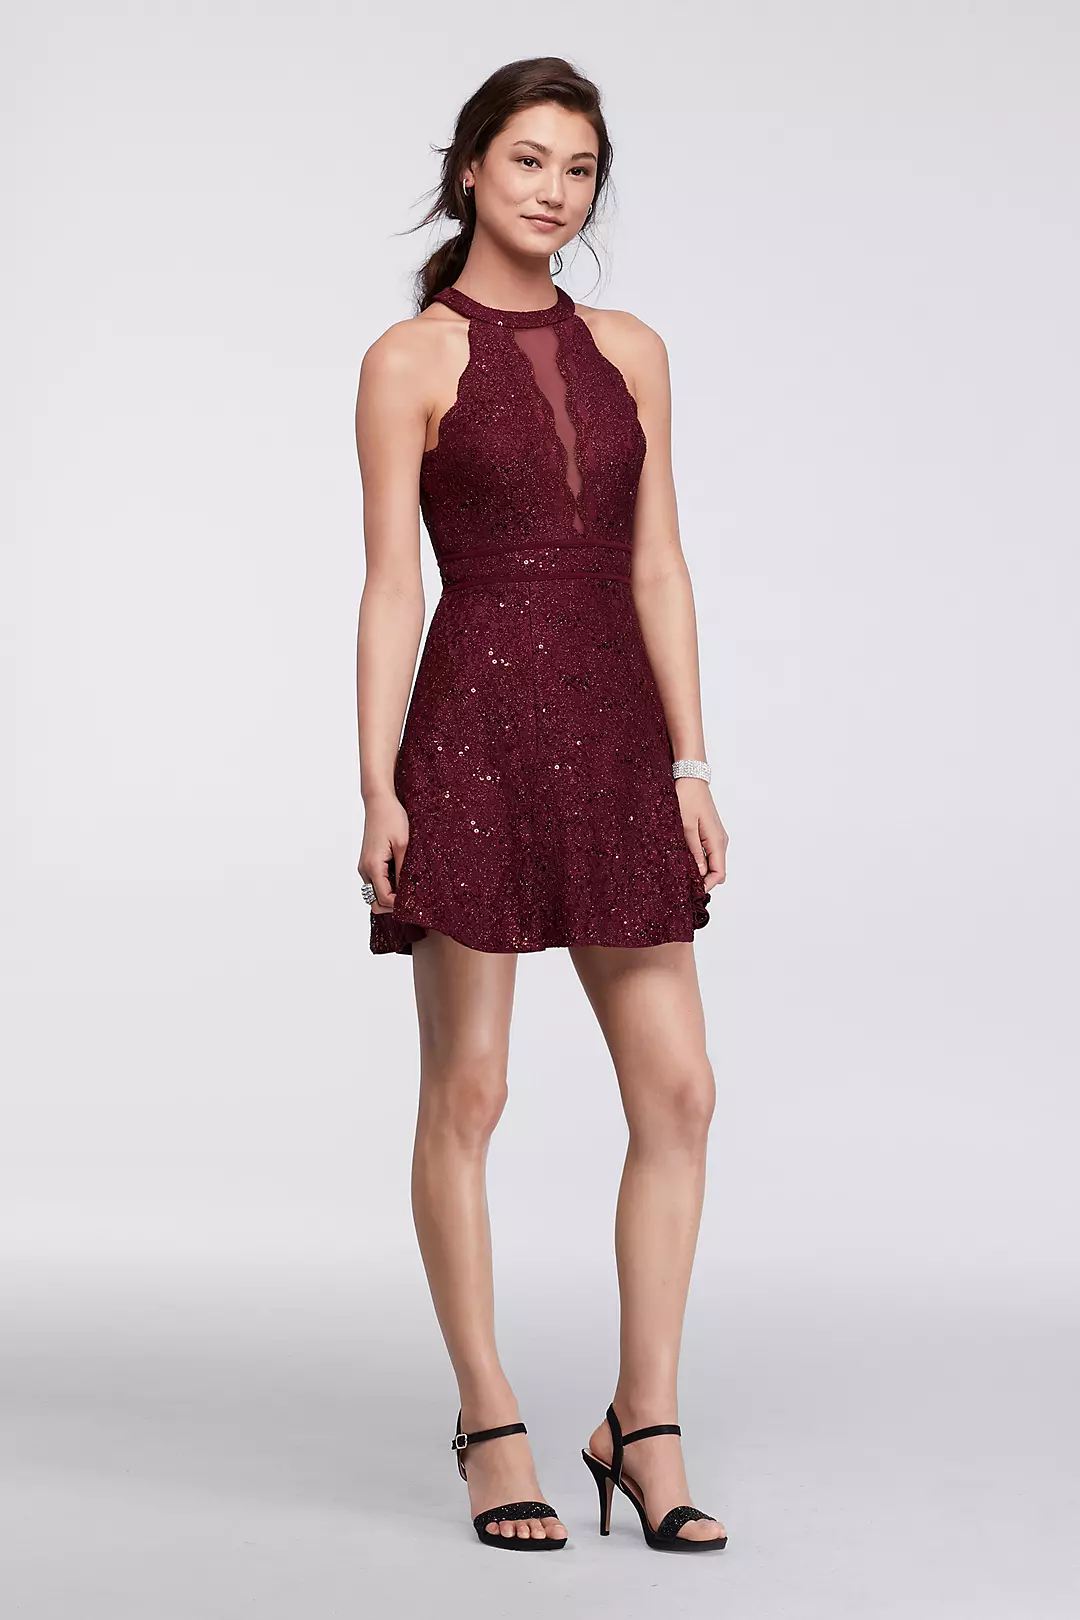 Short Halter Homecoming Dress with Illusion Inset Image